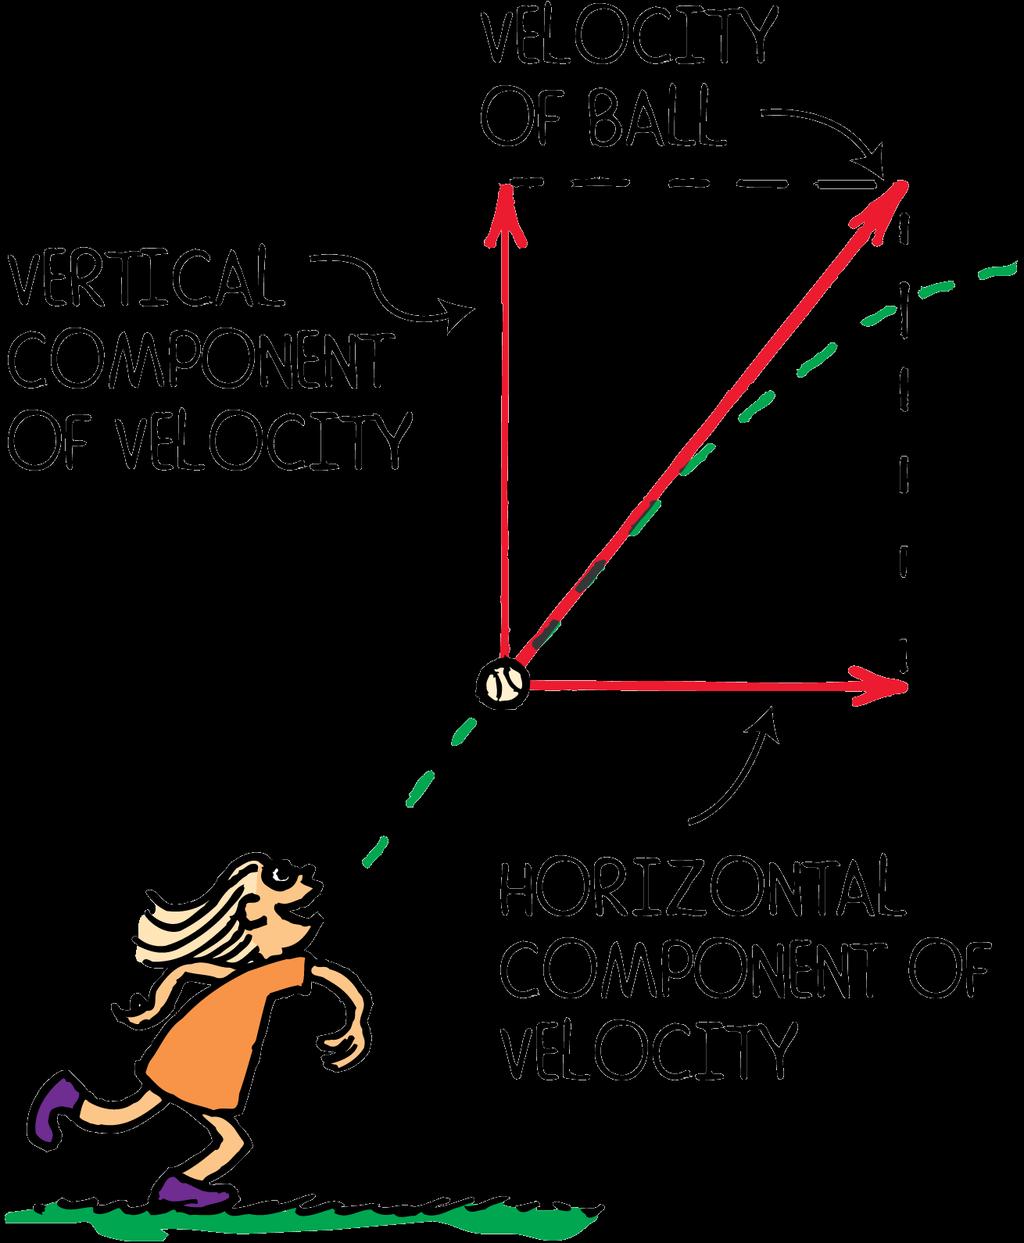 Acceleration due to gravity and kinematics nts of Vectors Let s think about